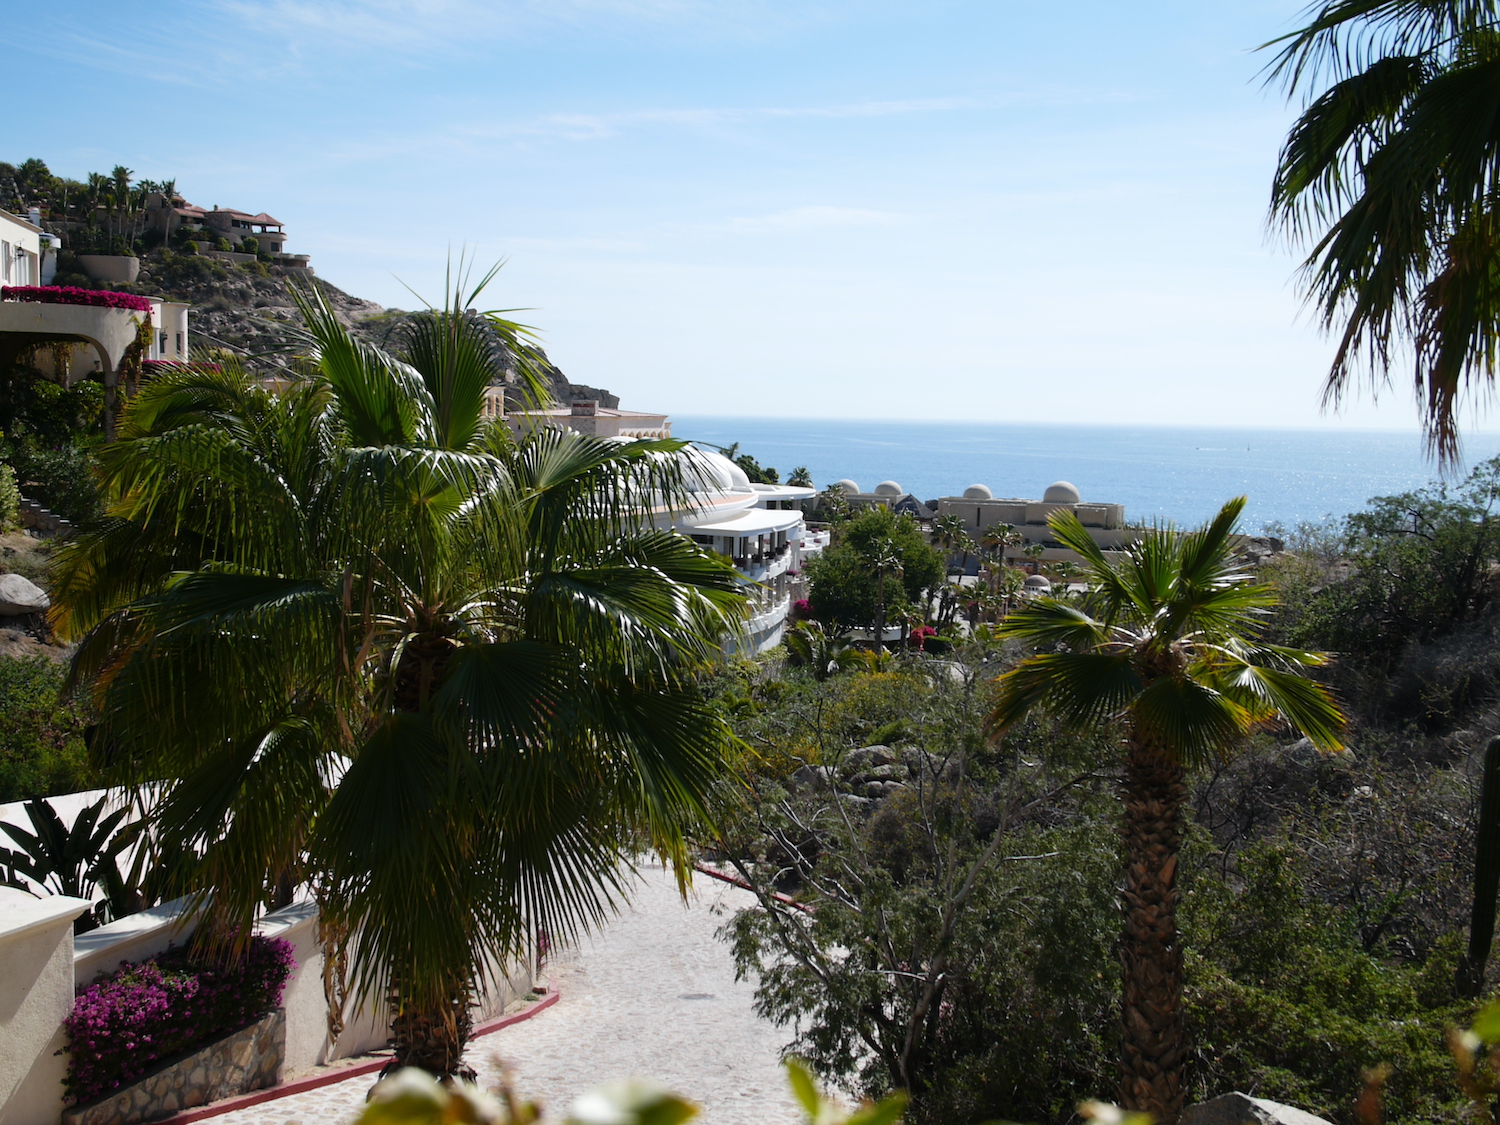 view of Pedregal, Cabo, Mexico